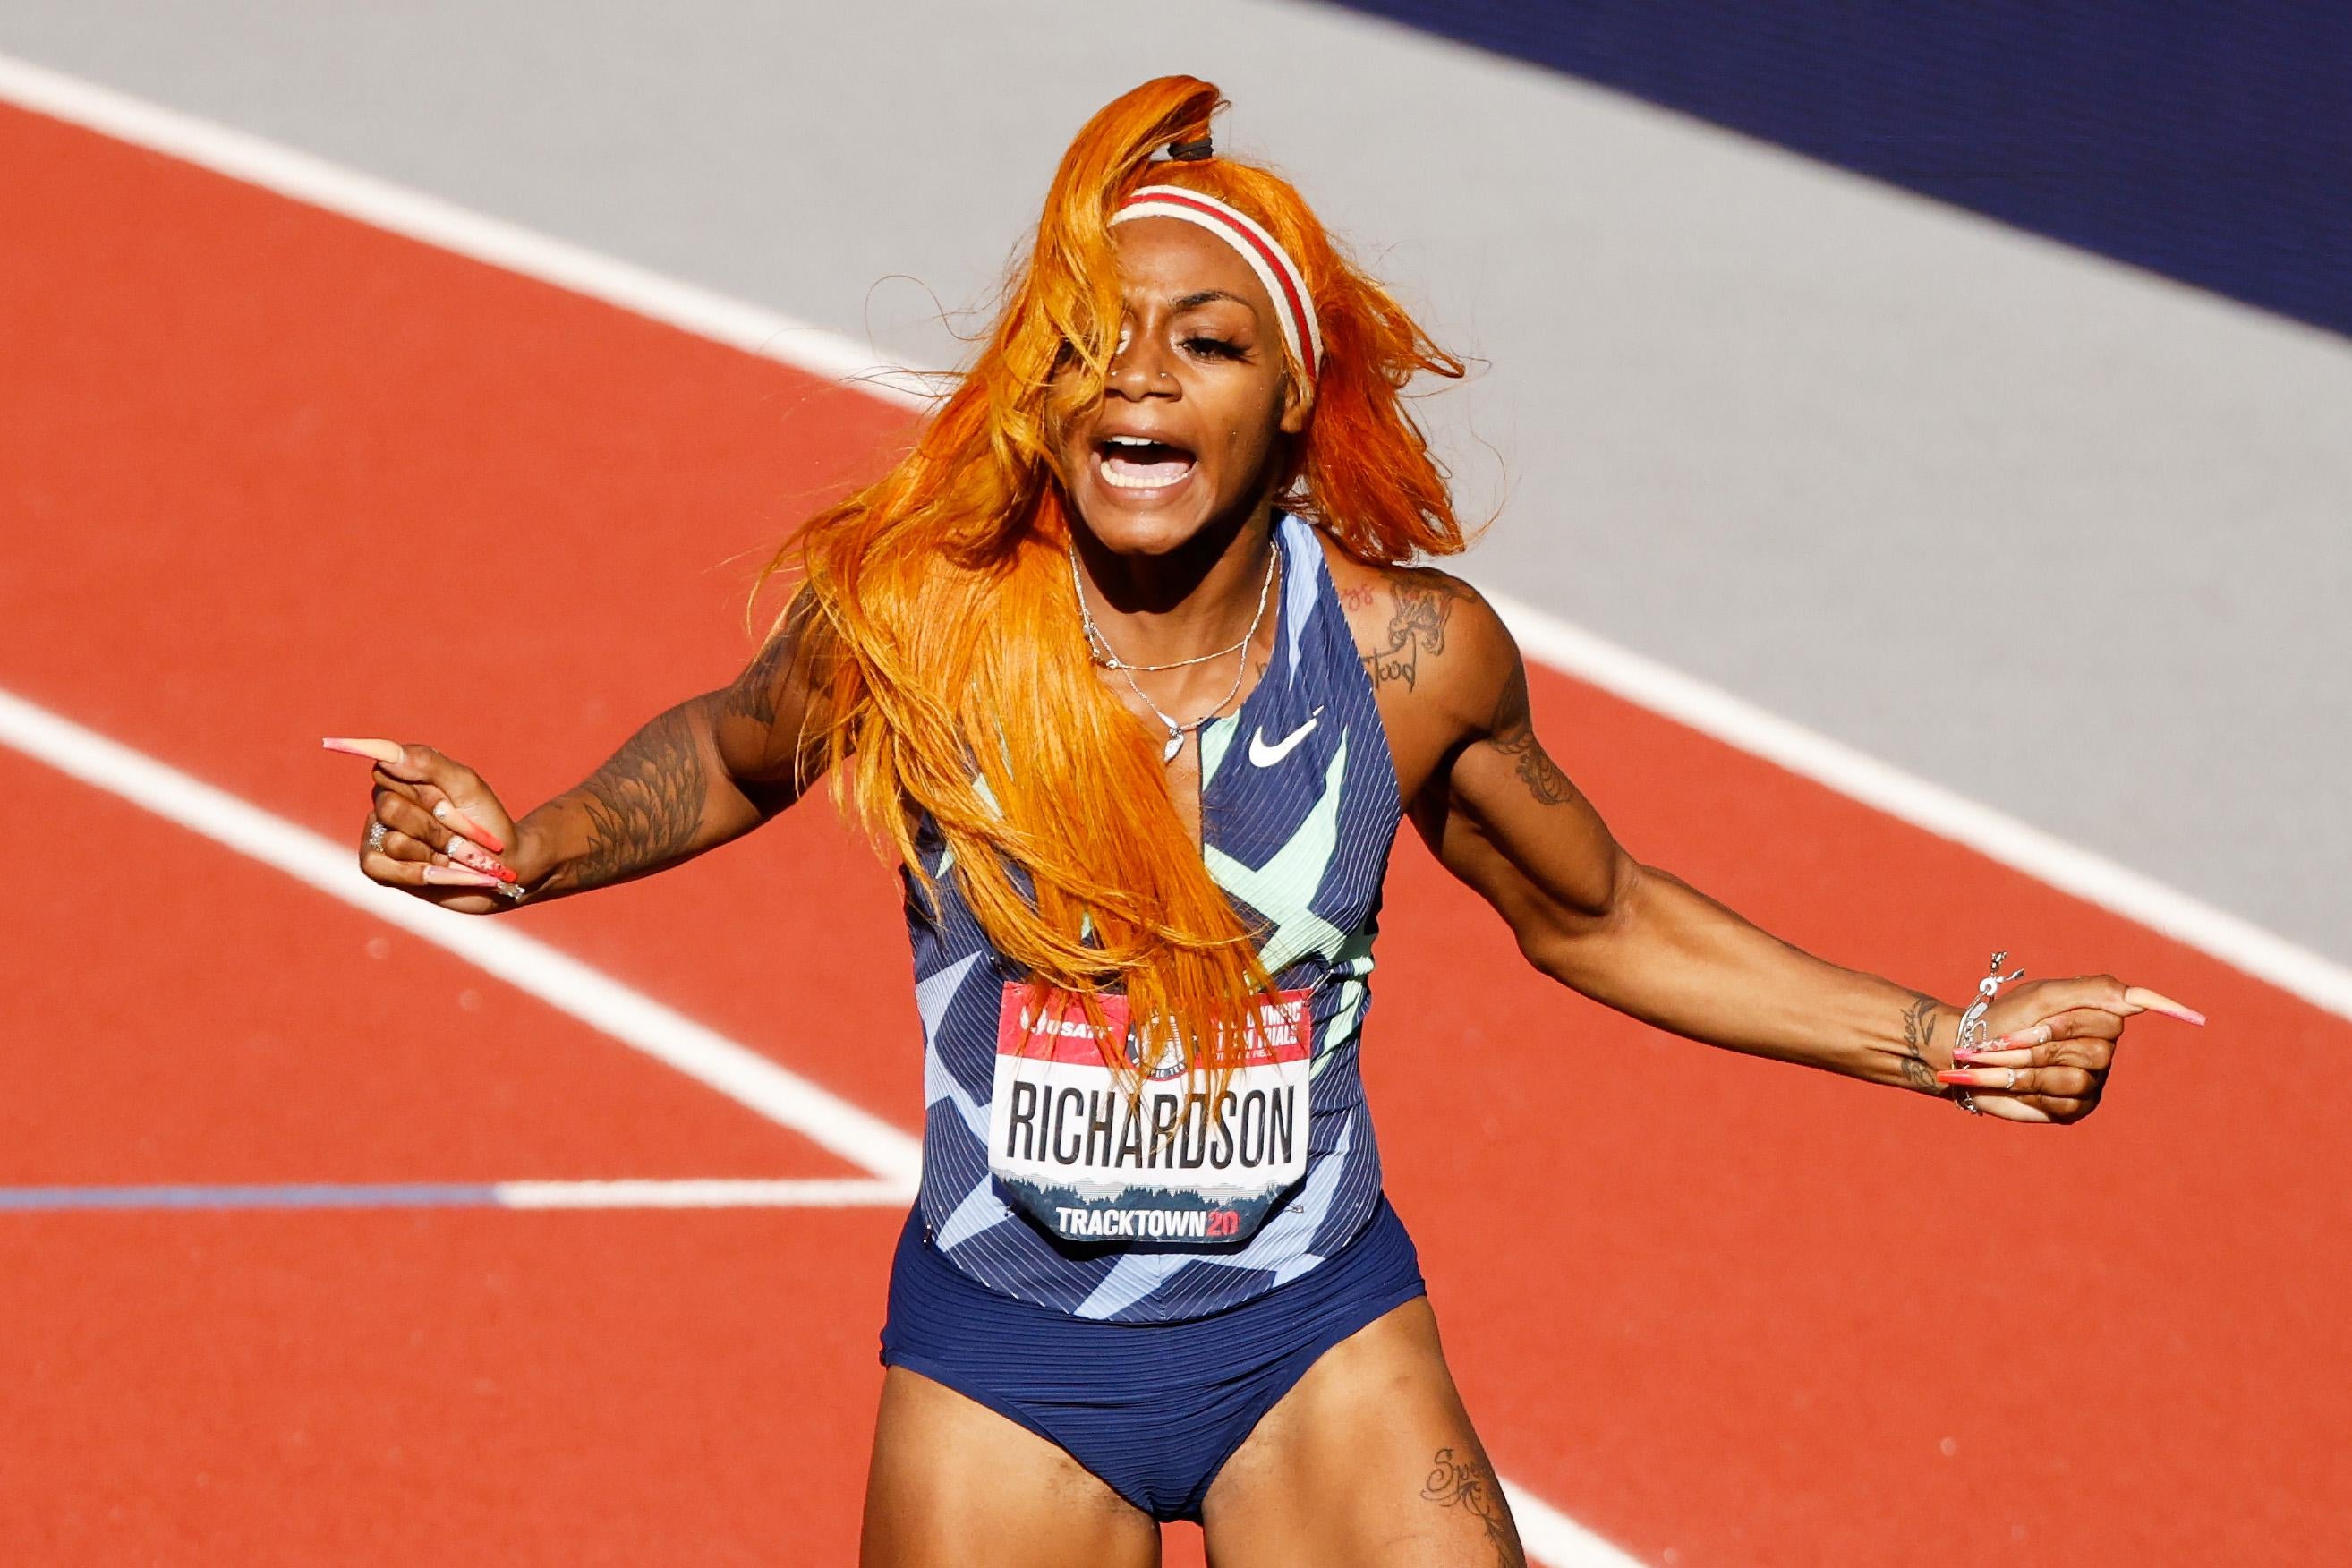 A woman with bright orange hair celebrates on a track.